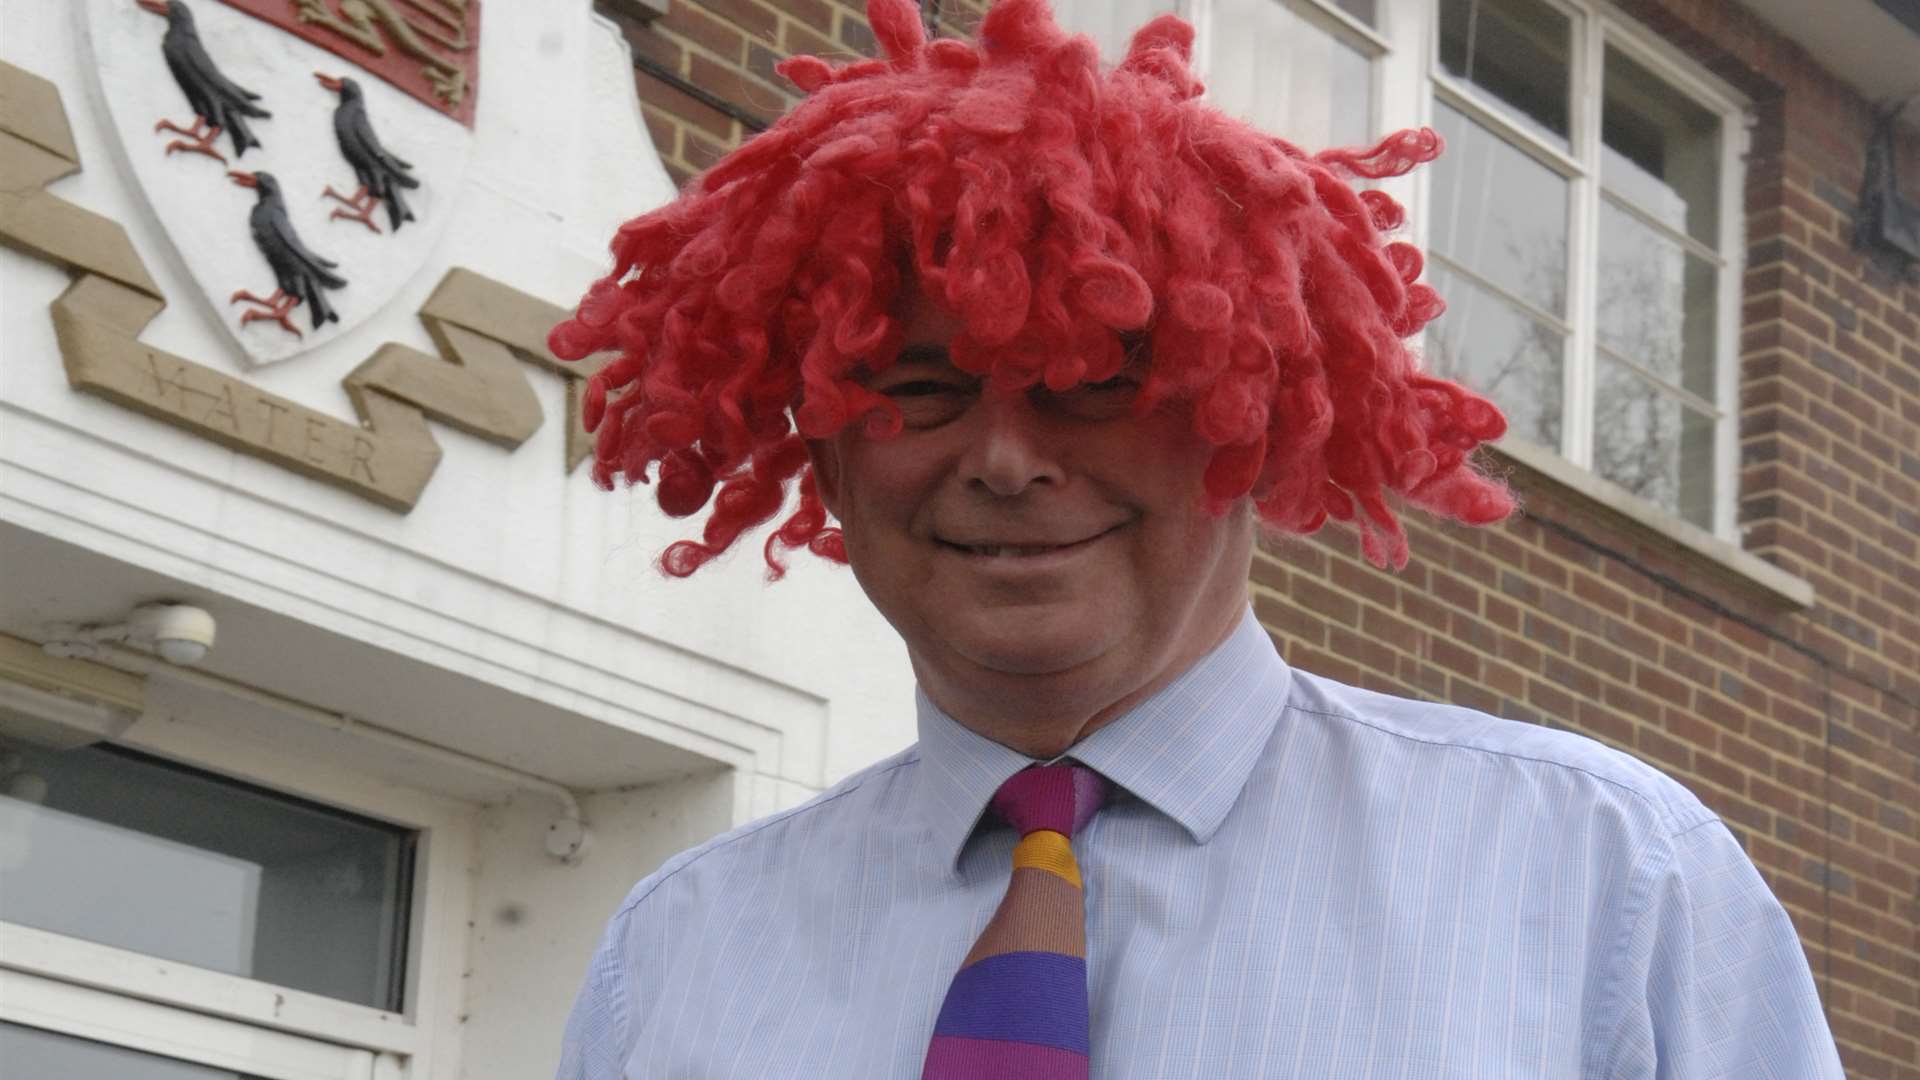 Clive Close in the wig worn during the mock kidnap